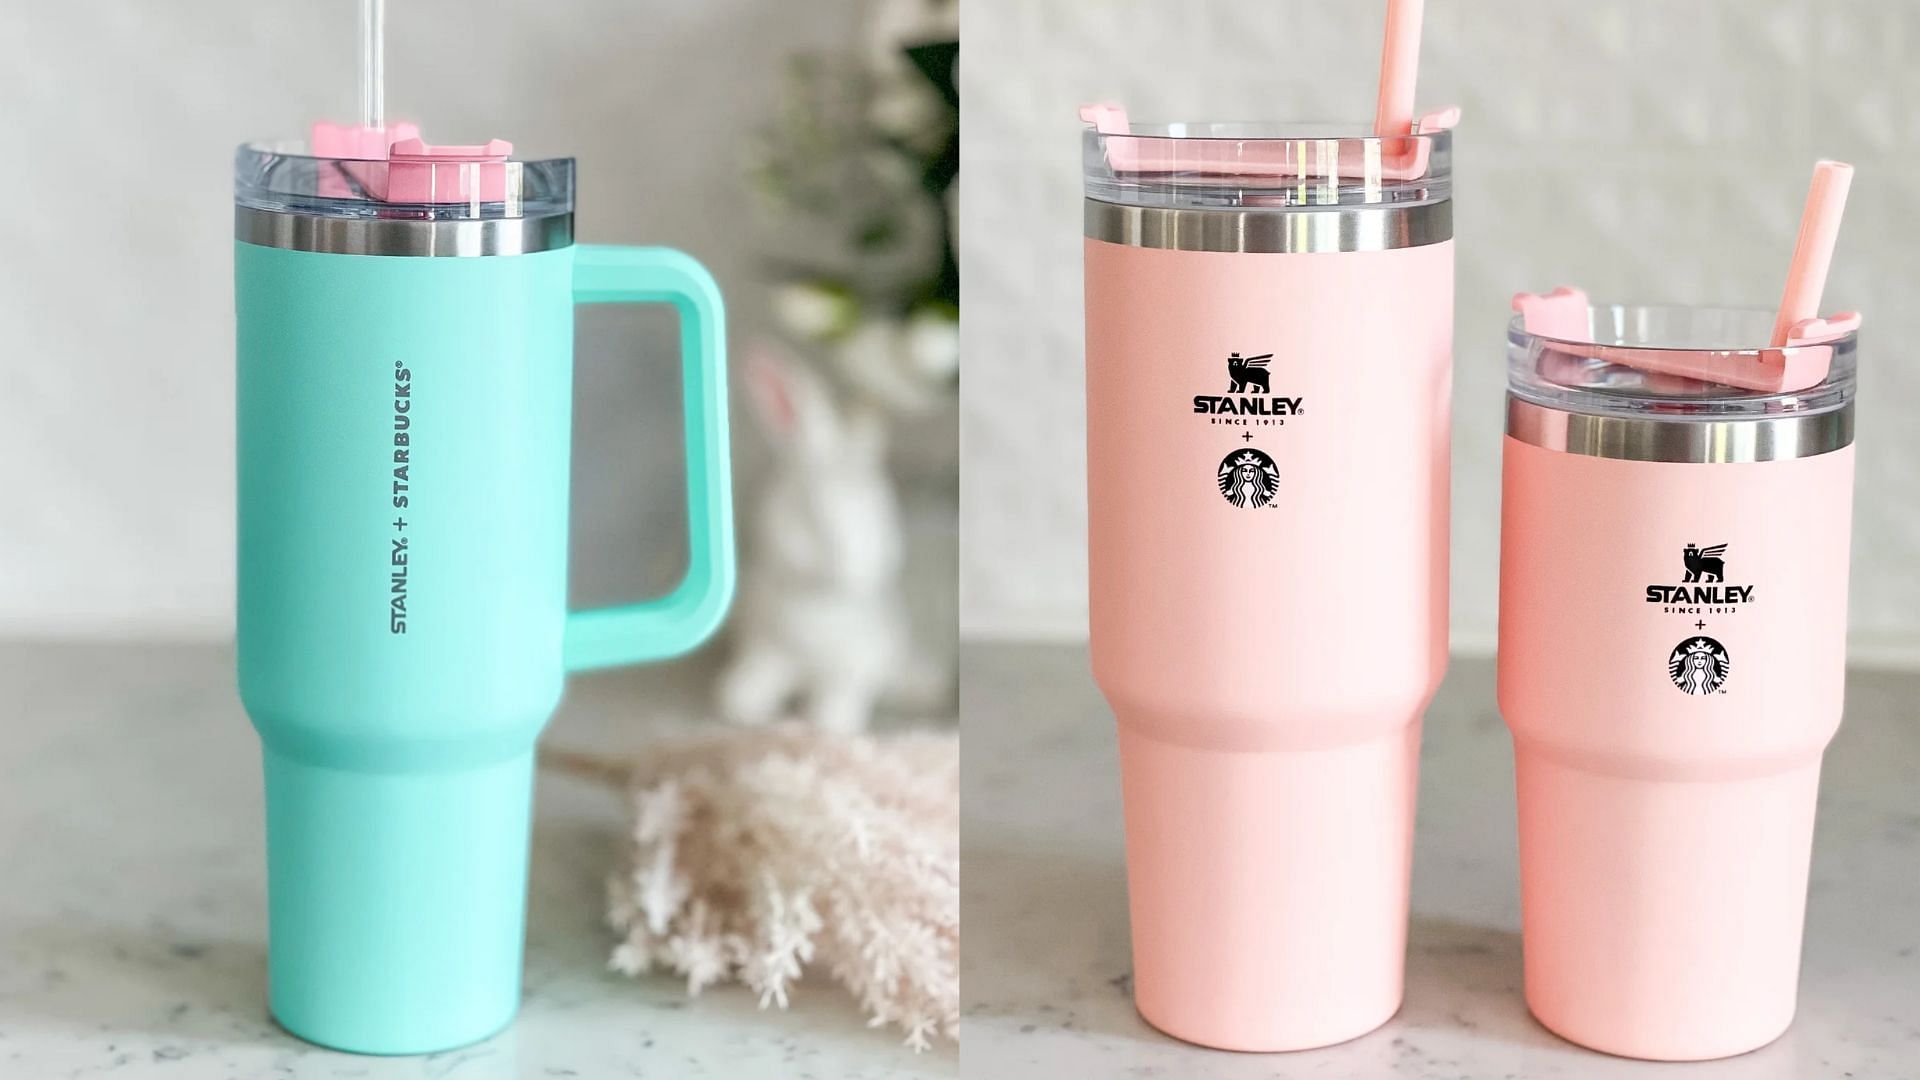 Starbucks+STANLEY Stainless Tumbler 16 oz.Cold Cup Peach Thailand only